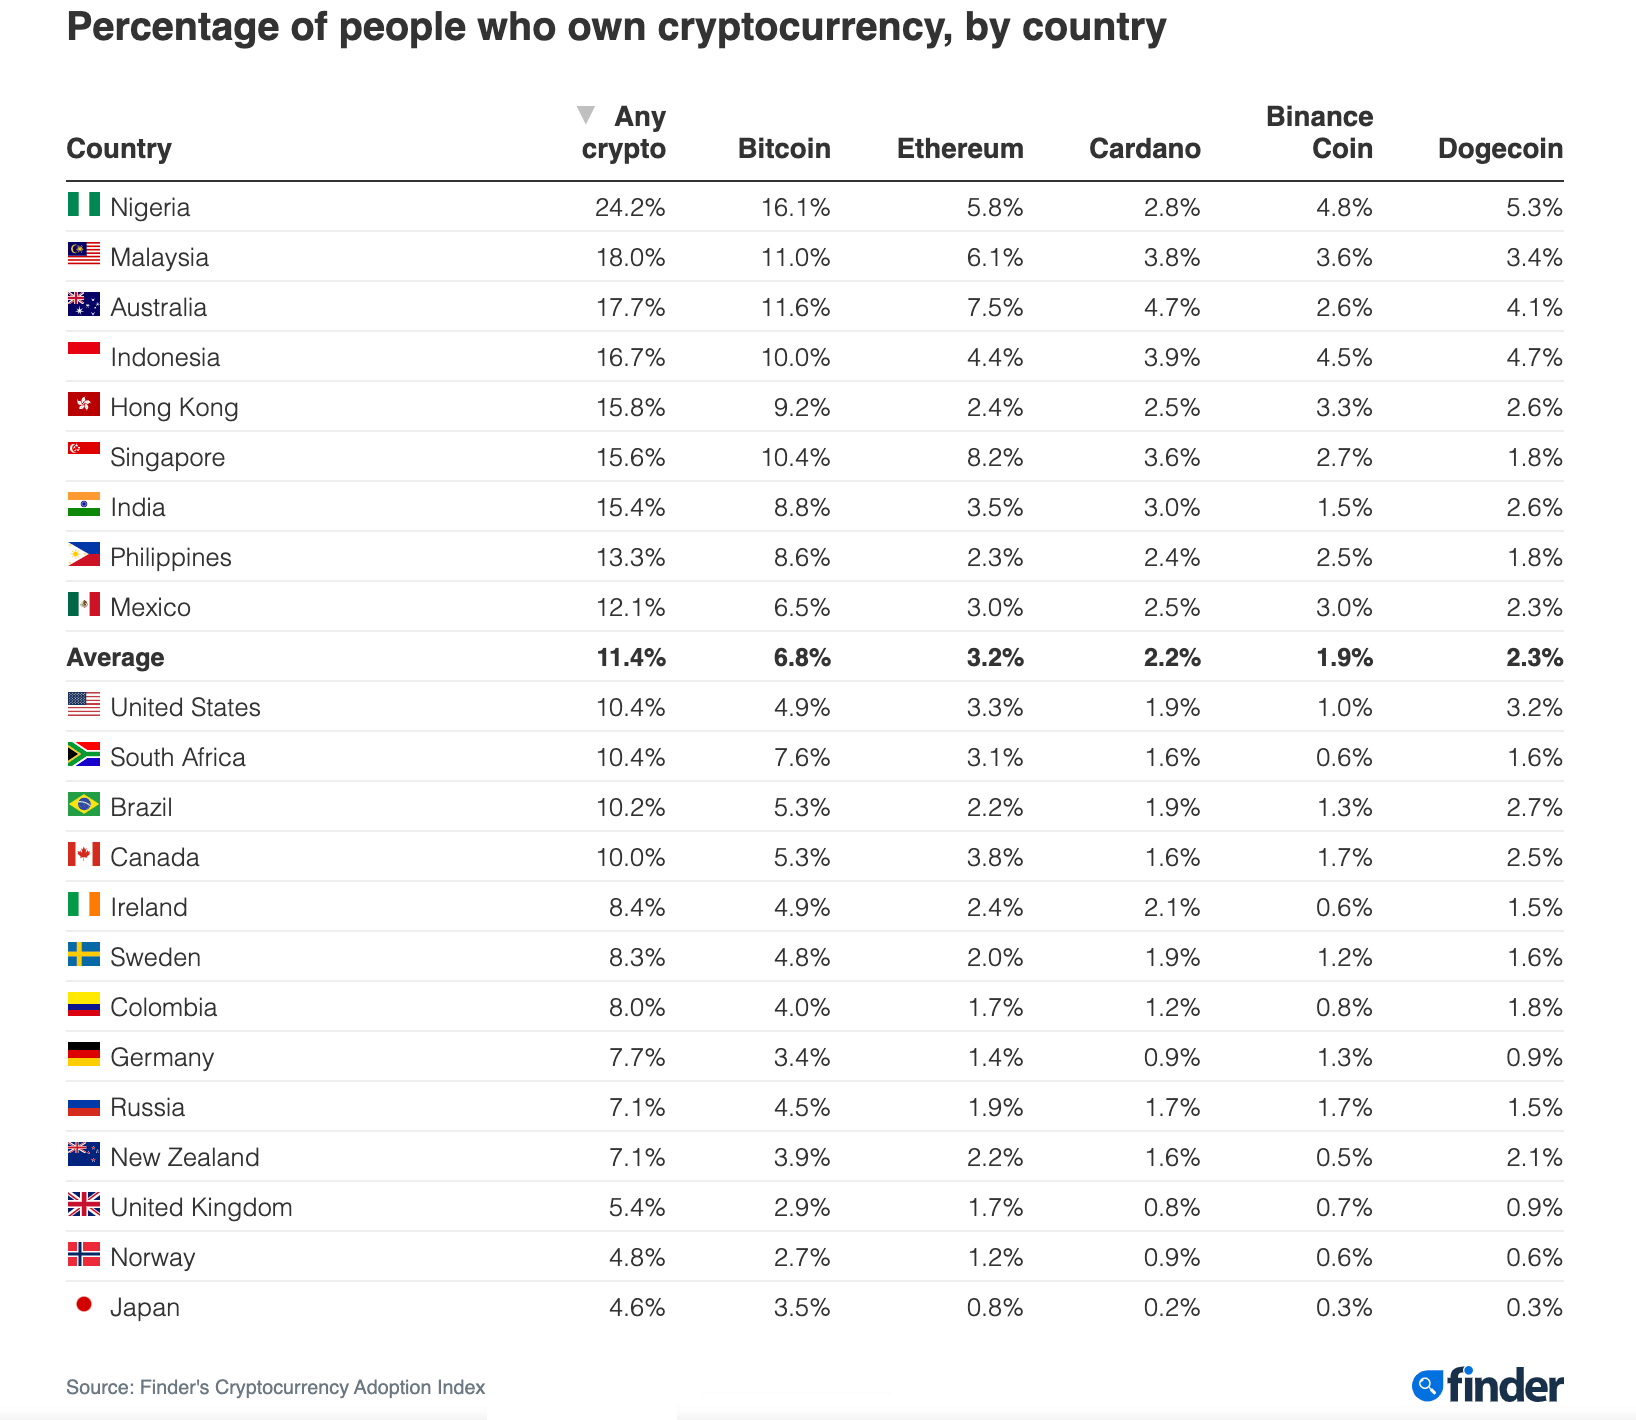 Does already 11% of people own cryptocurrencies? Do you know where they are most popular?